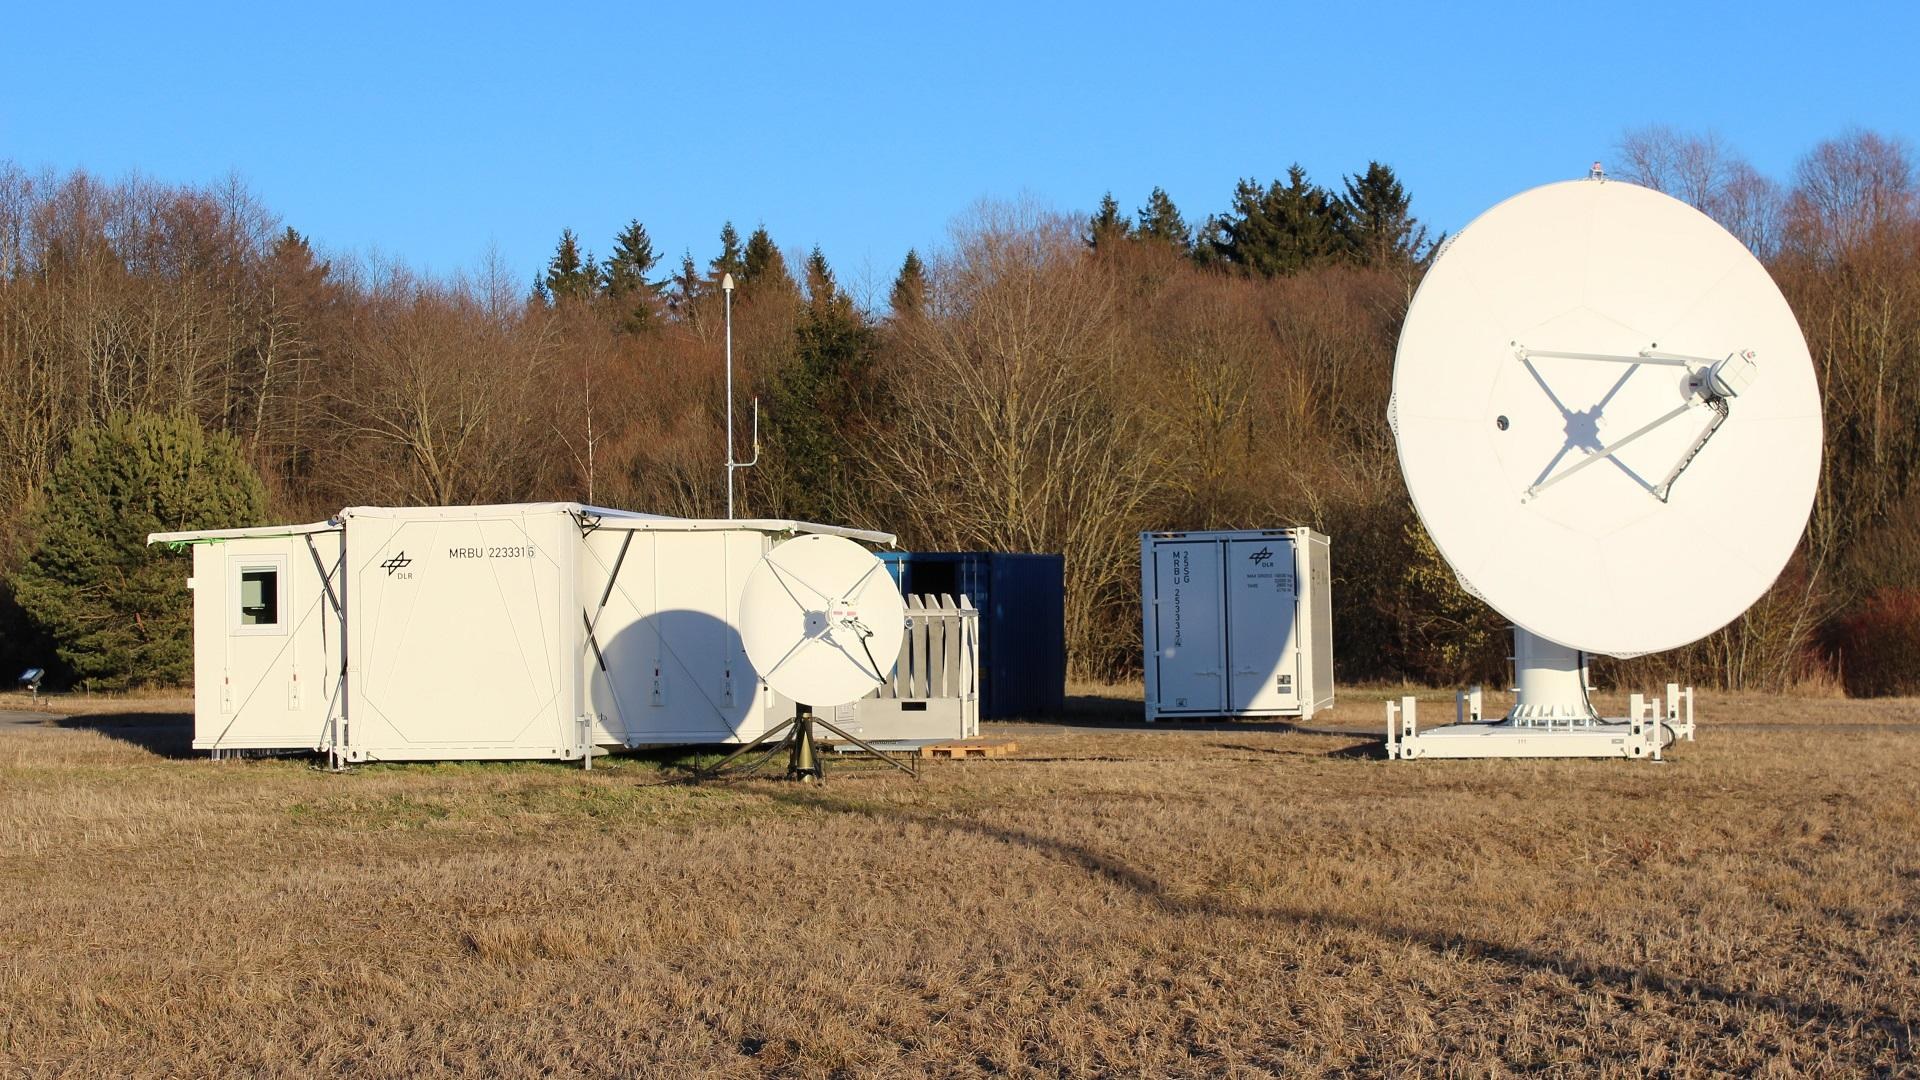 Mobile telemetry station during its final inspection in Weilheim, with the main antenna mounted on a flatrack